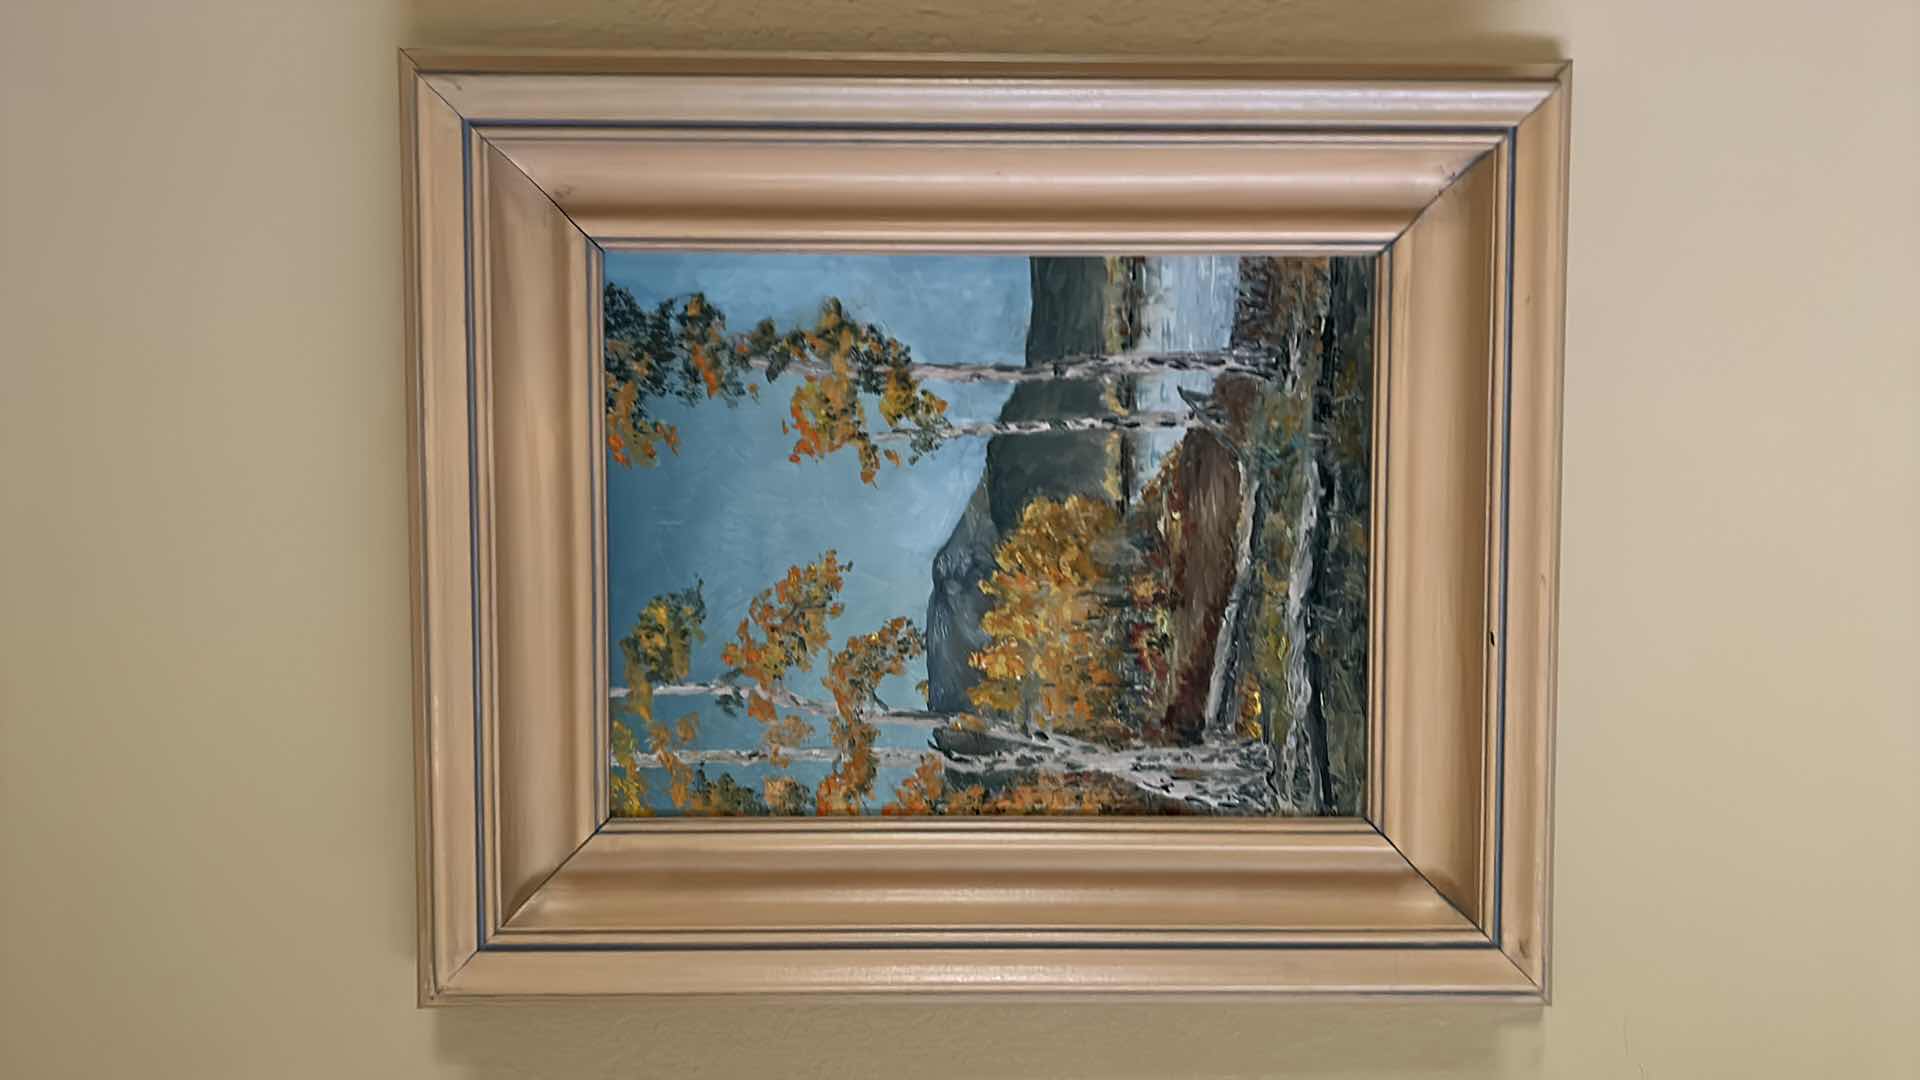 Photo 8 of ARTISIT SIGNED OIL PAINTING ON CANVAS “LANDSCAPE” FRAMED